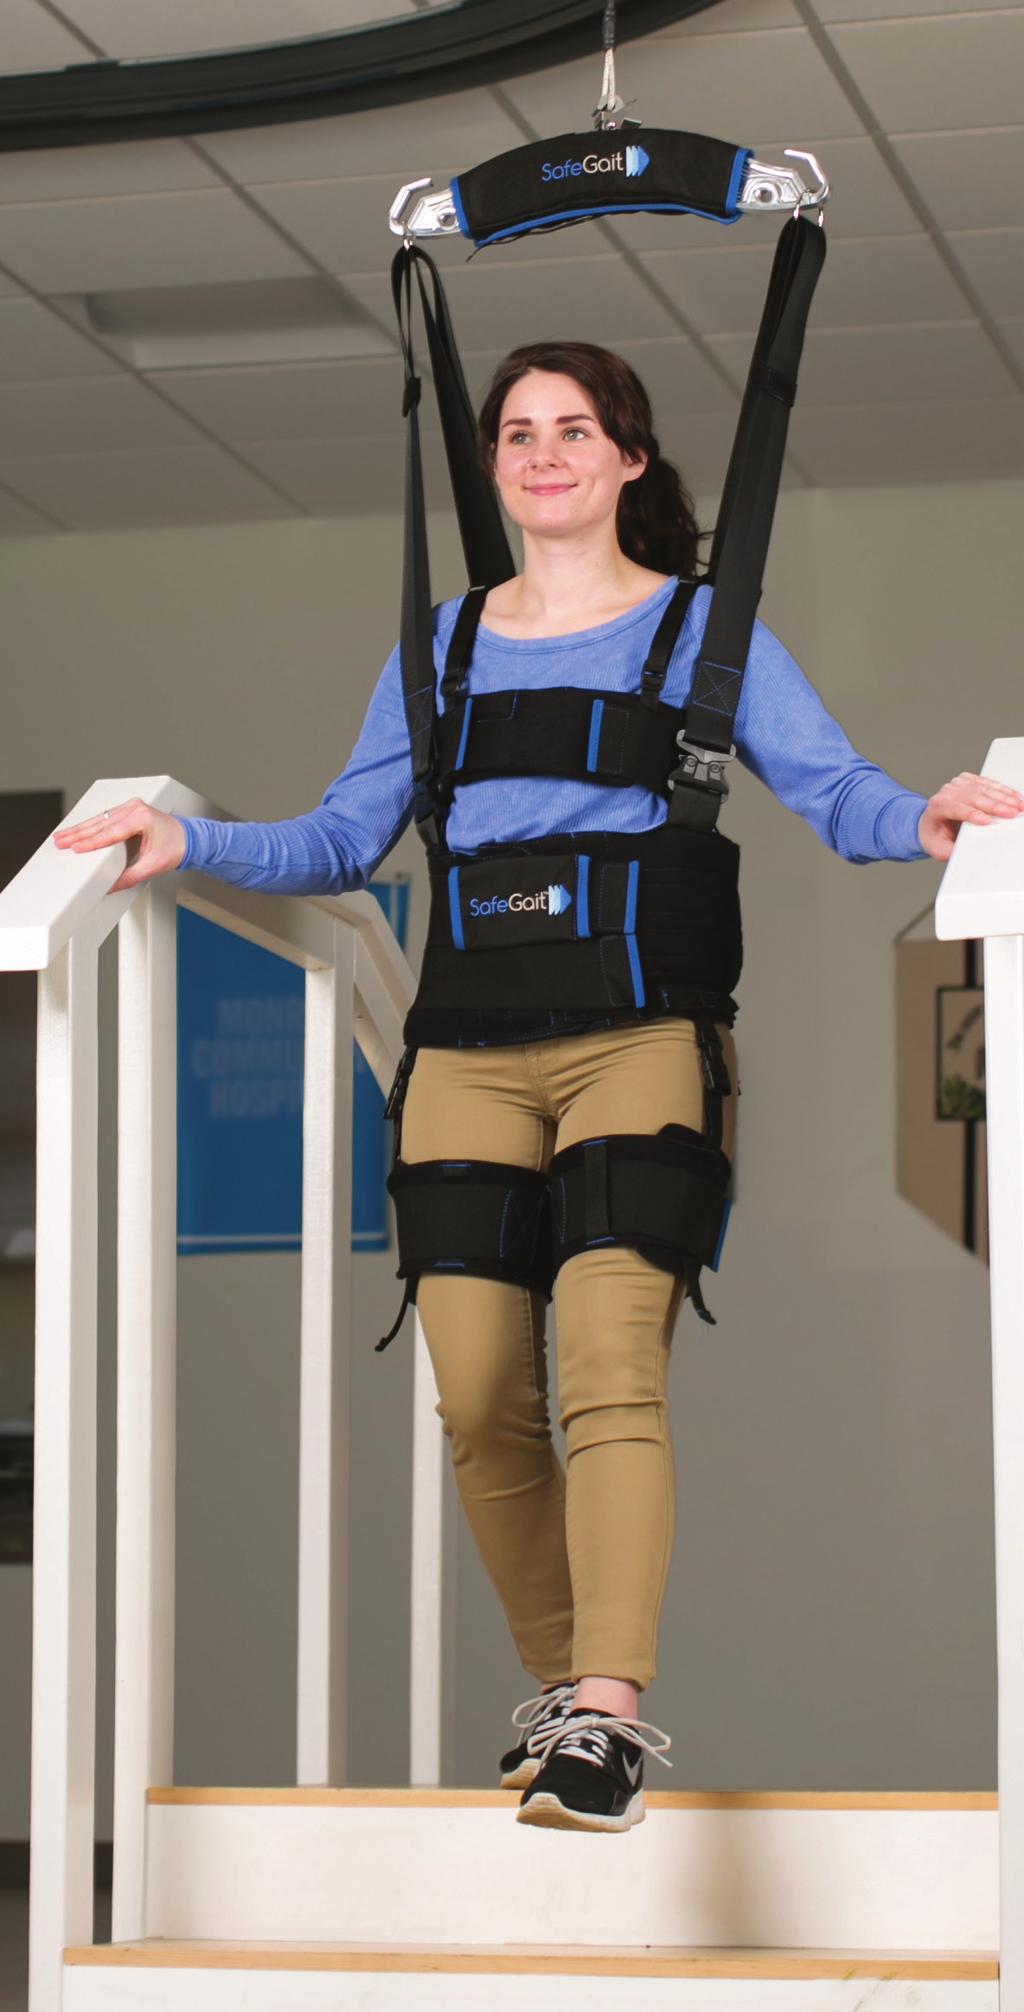 Designed in collaboration with PTs and OTs, the SafeGait EMBRACE Rehabilitation Harness, is an innovative solution that addresses traditional harness pain points and enables patients